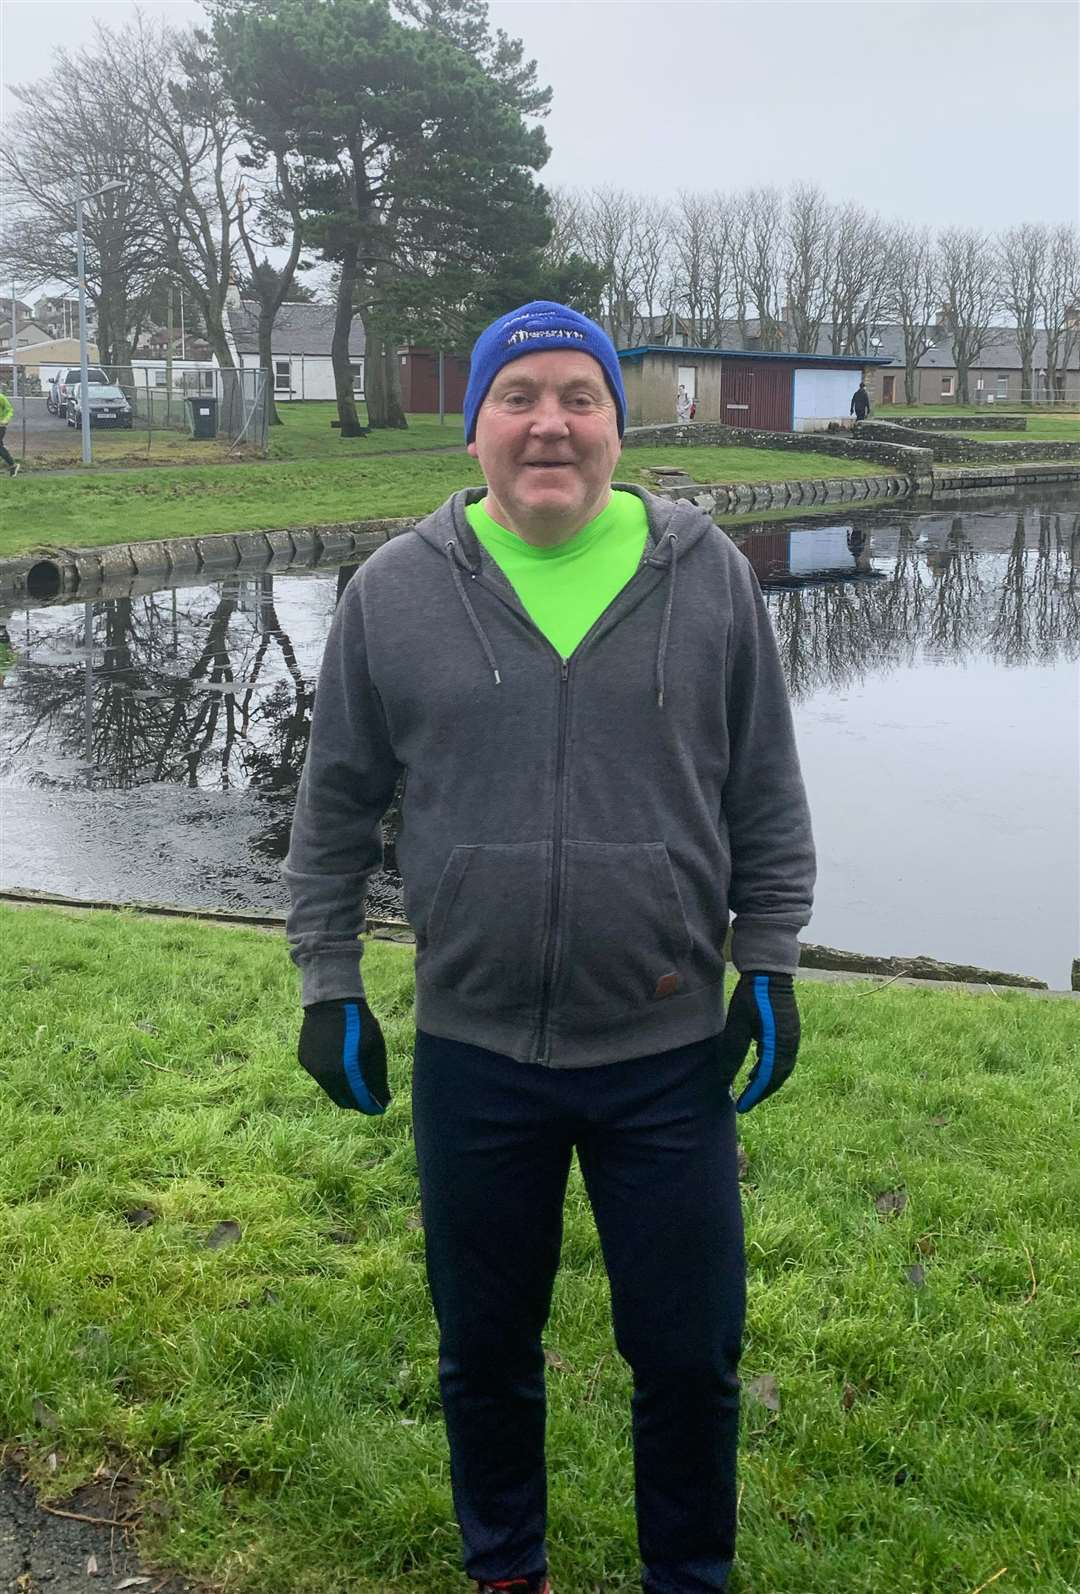 Peter Dobbie was taking part in his 50th parkrun at Thurso.